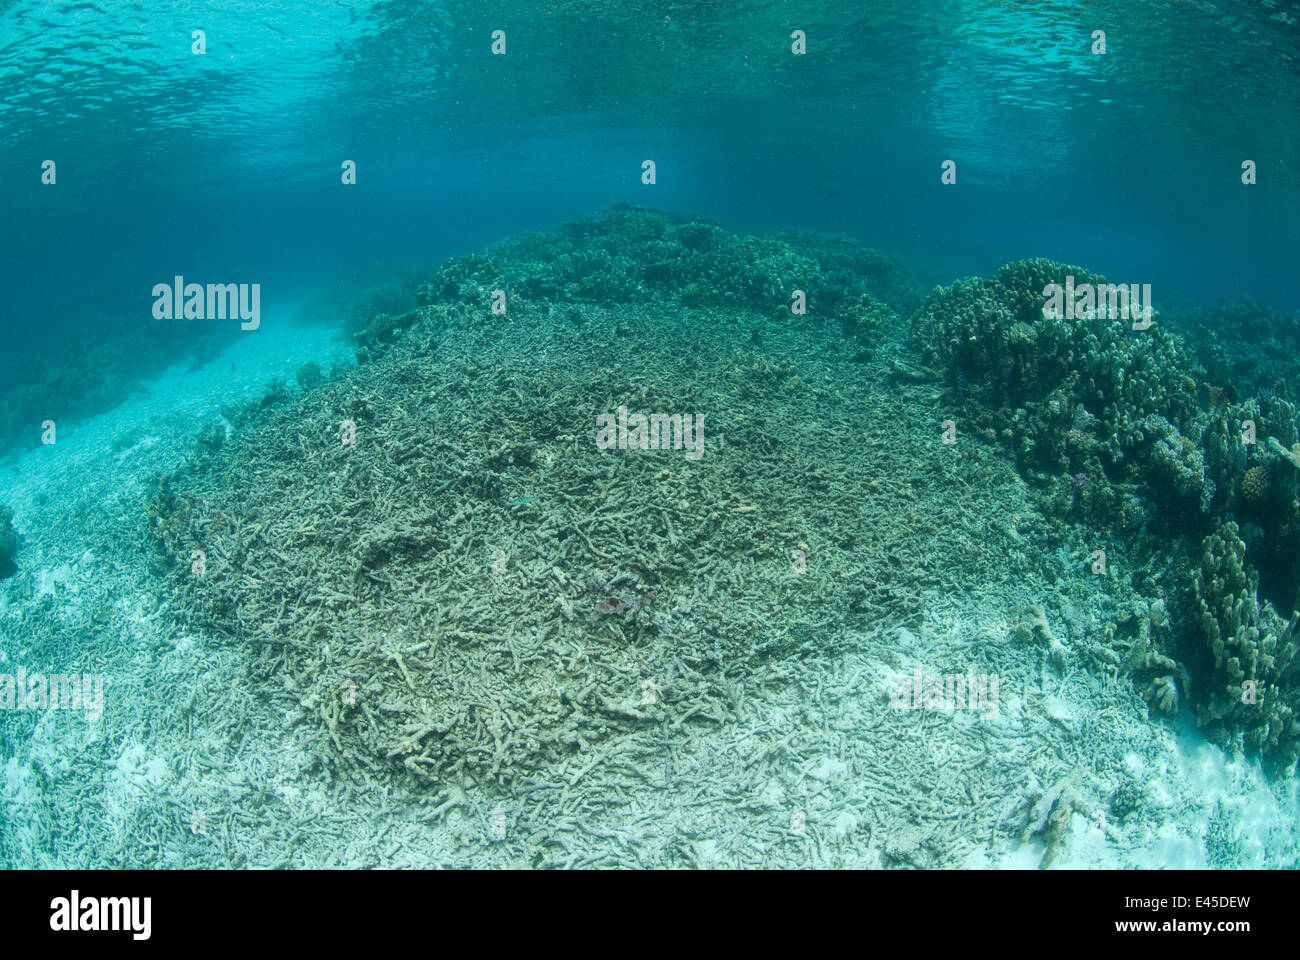 Damaged coral reef, possibly storm damage, Great Barrier Reef, Australia, 2008 Stock Photo